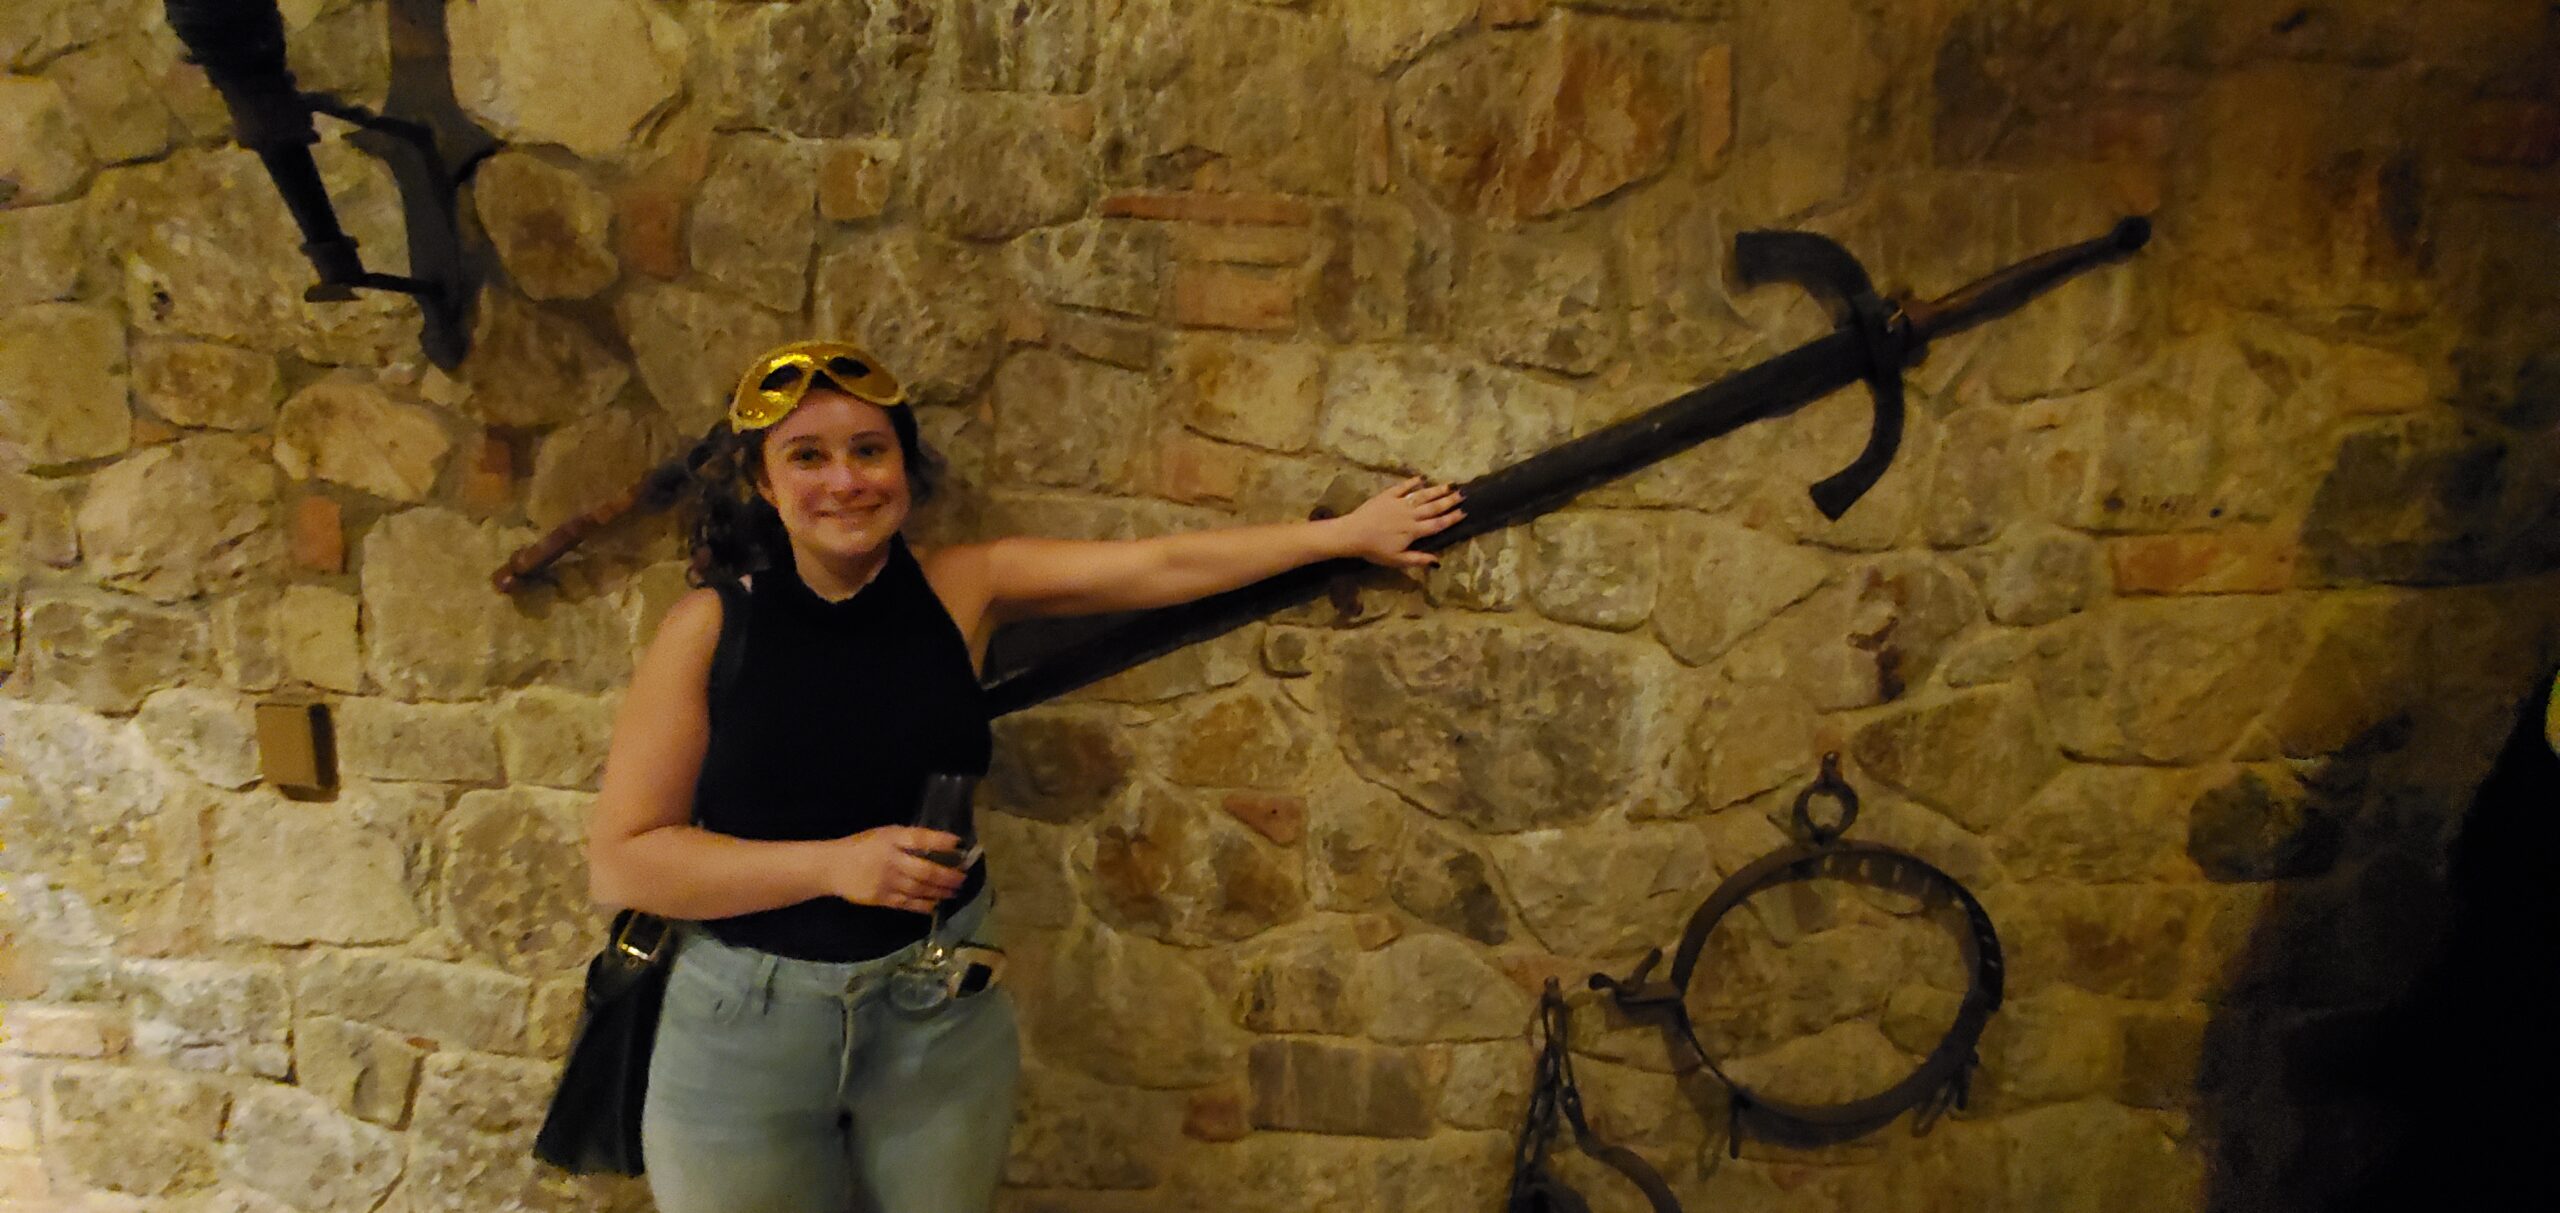 Ava with a longsword in the weapons room of Castello di Amorosa.